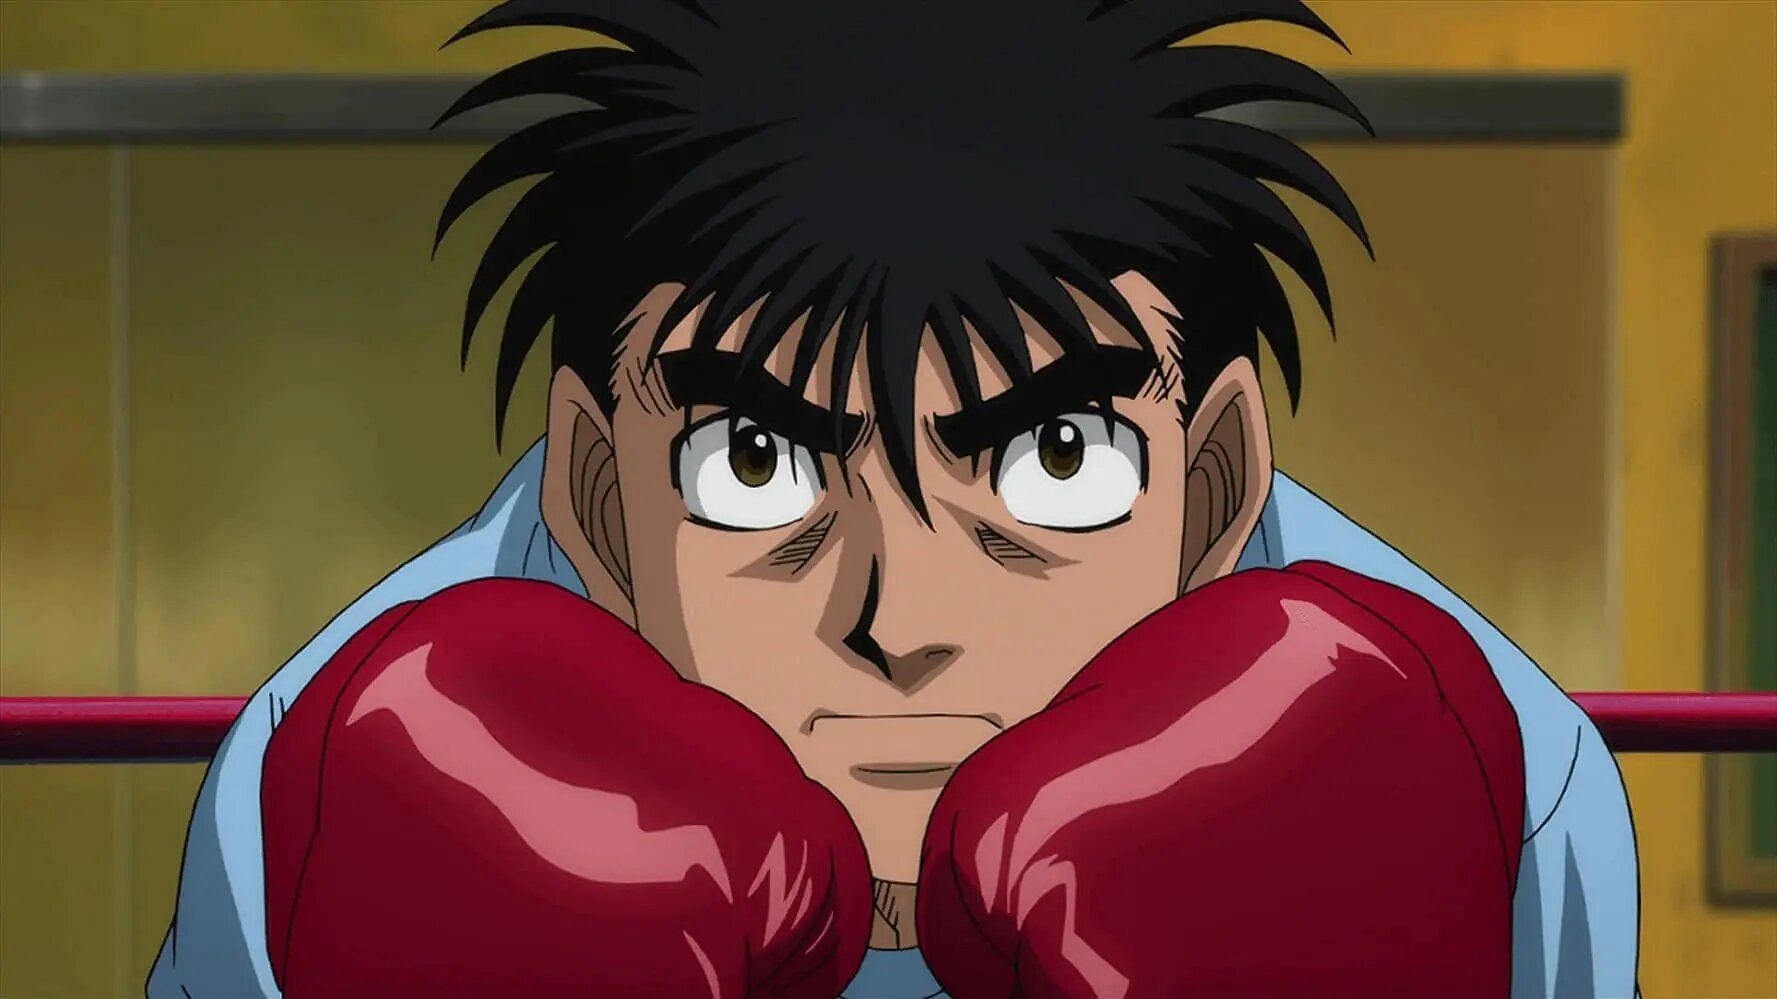 weird-quelea209: 1 cute anime girl, tomboy, pixie cut, curly green hair,  dark, muscular skin, black clothes, red boxing gloves on hands, boxing ring  in the background